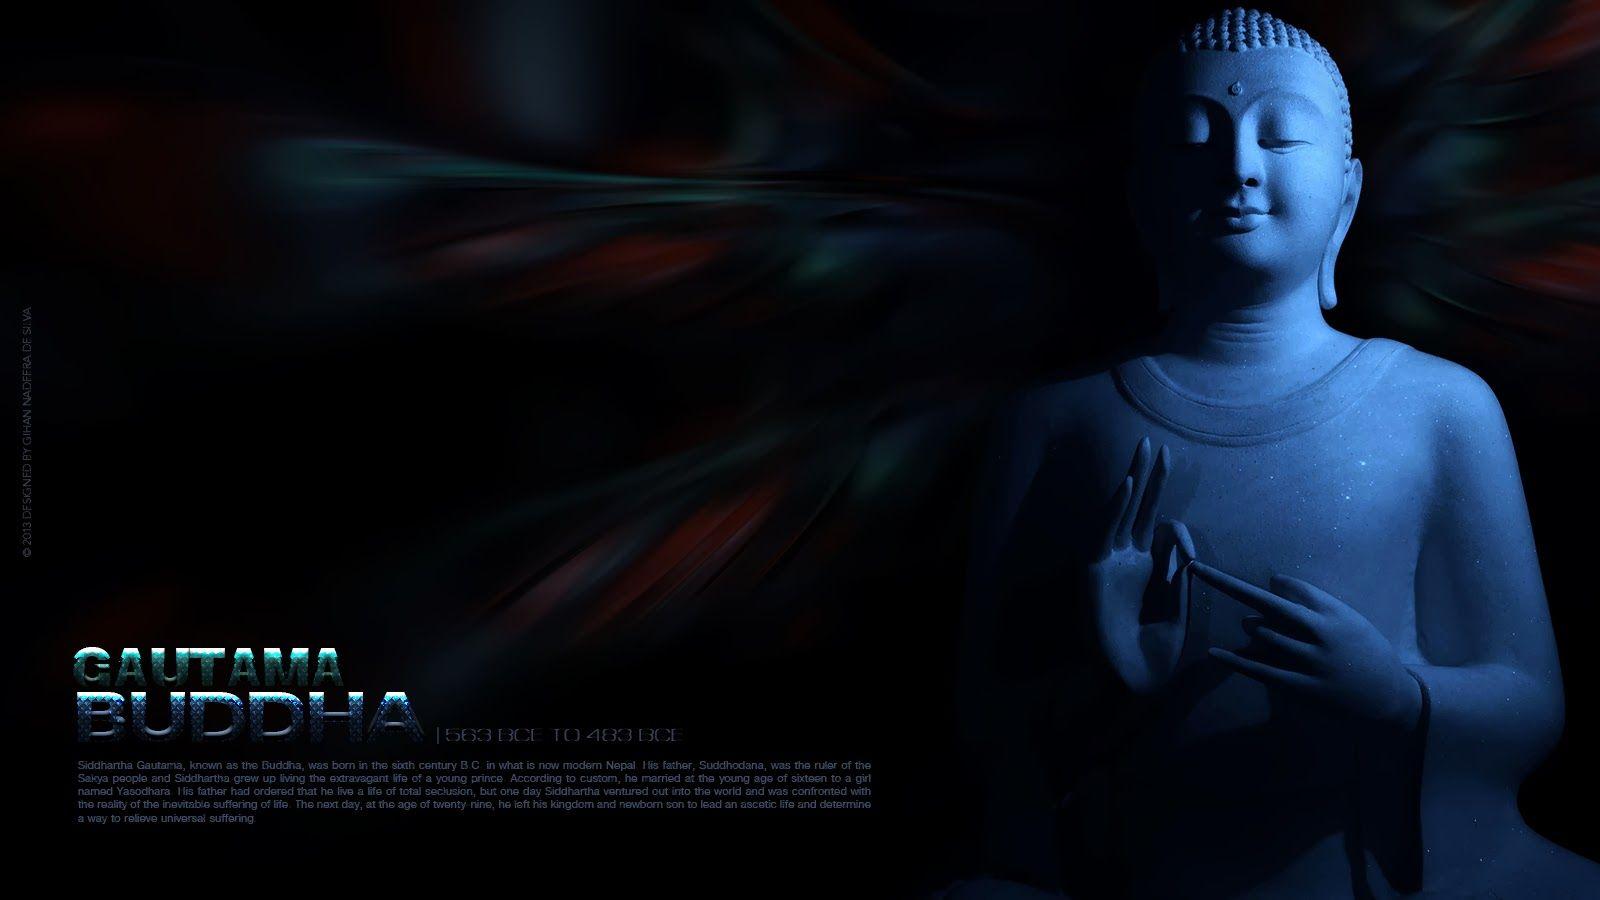 Buddha wallpapers for desktop, download free Buddha pictures and backgrounds  for PC | mob.org